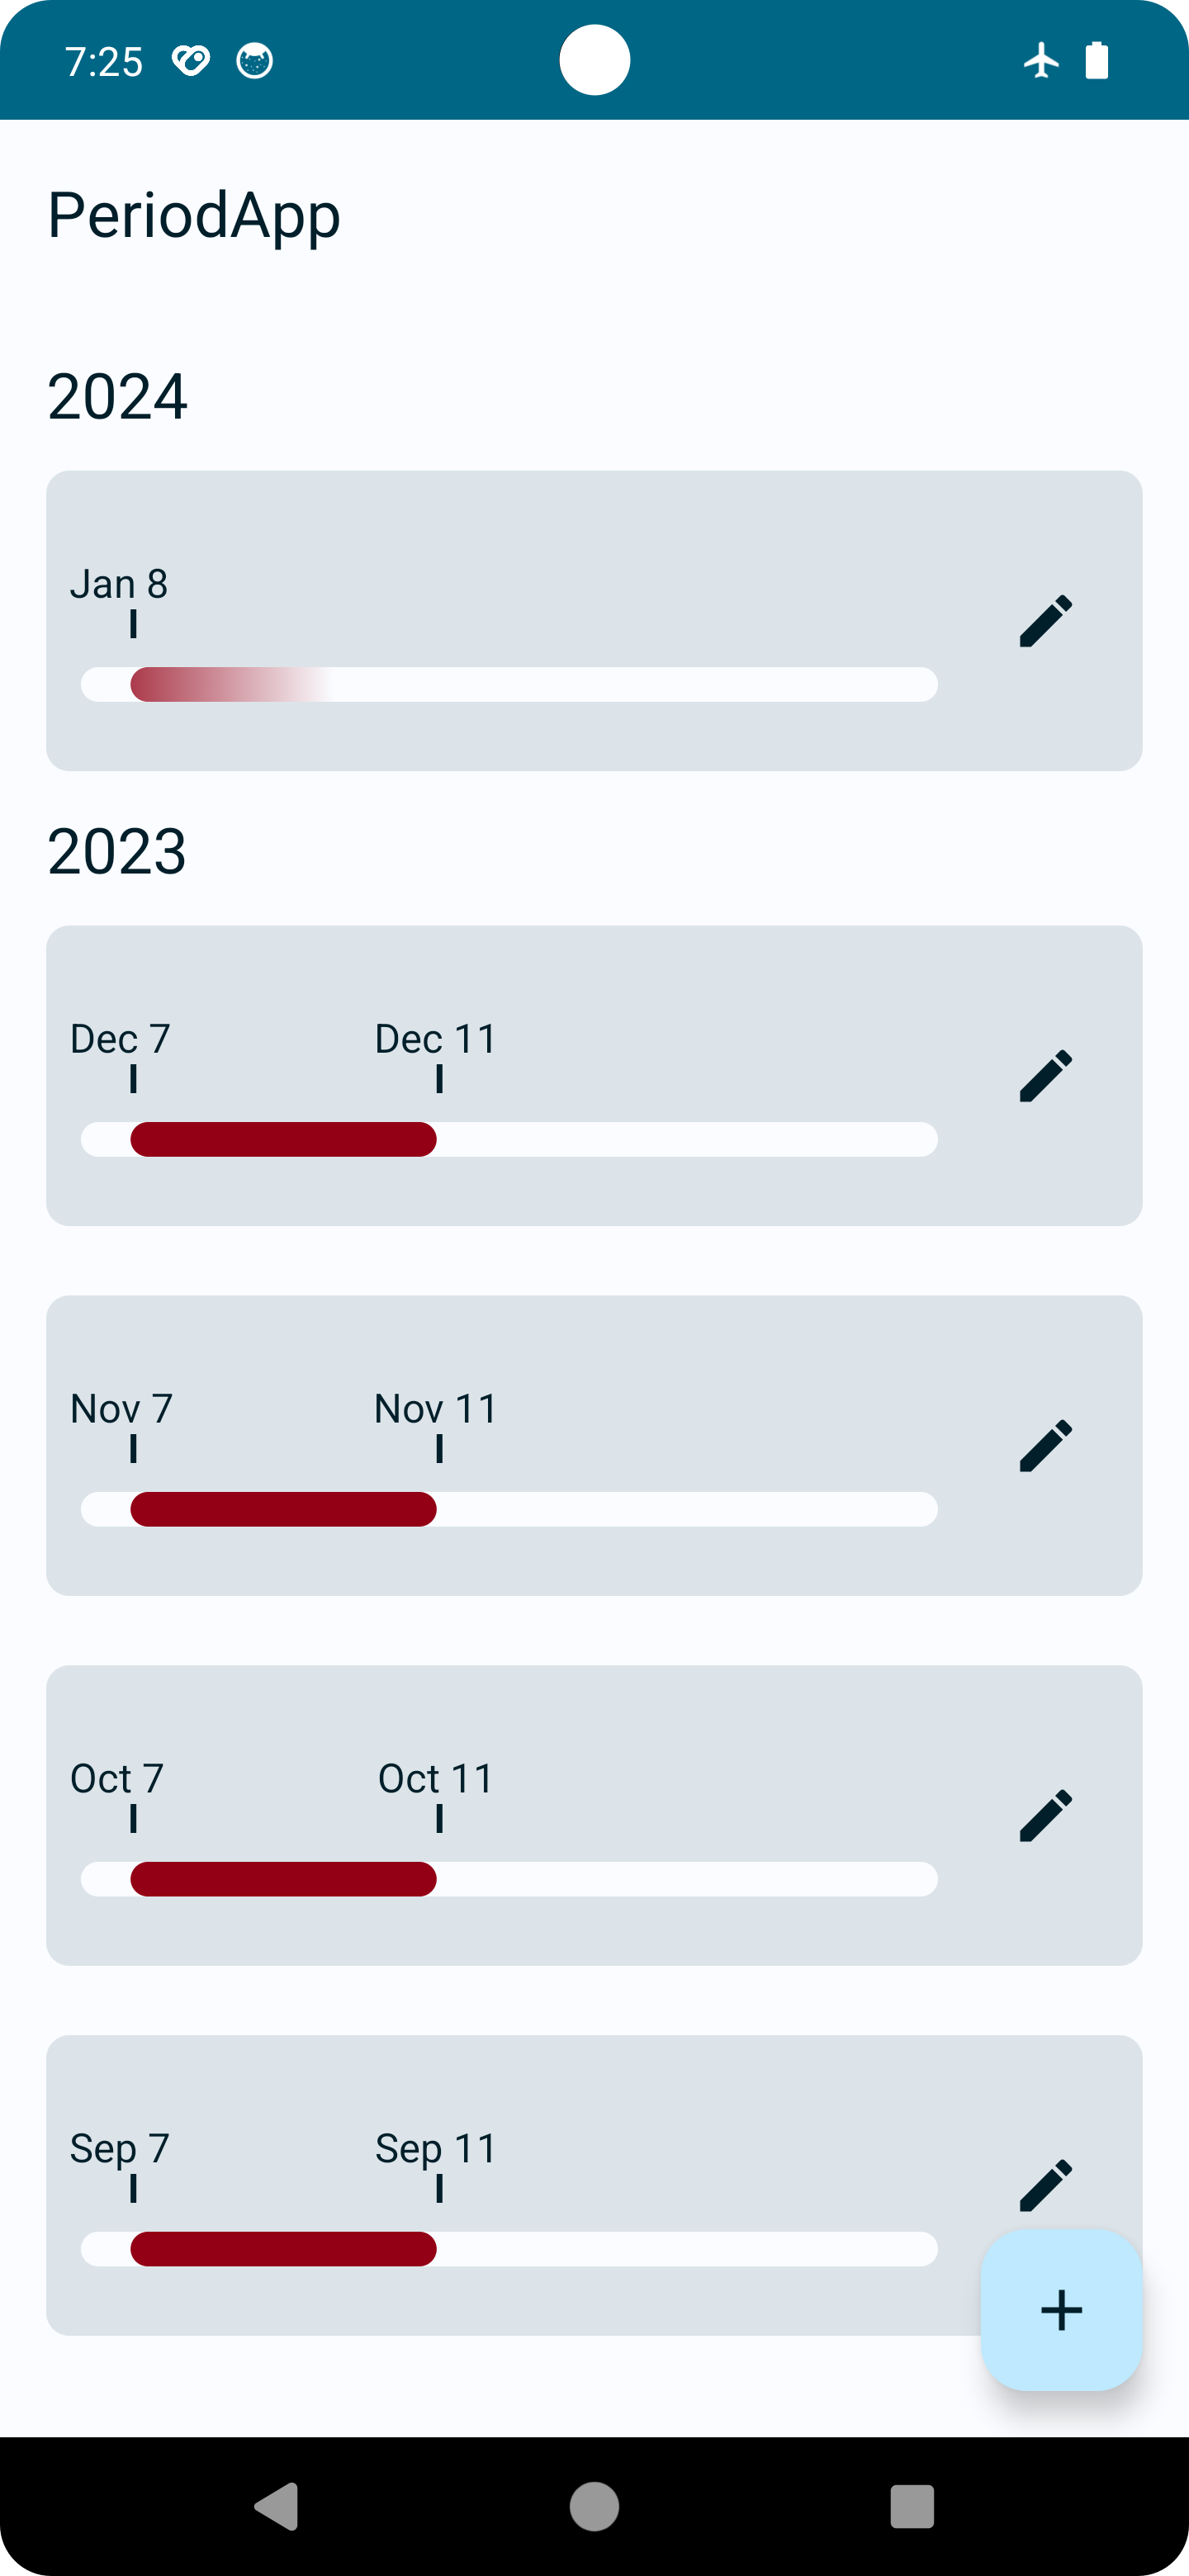 PeriodApp Ui, which has menstruation periods listed. The data is grouped into years, and under each year each period is displayed visually as thick red line over a wider, white rectangle. The start and end dates are marked above the start and end of the red line. The topmost period does not have end date, and the color fades to white.